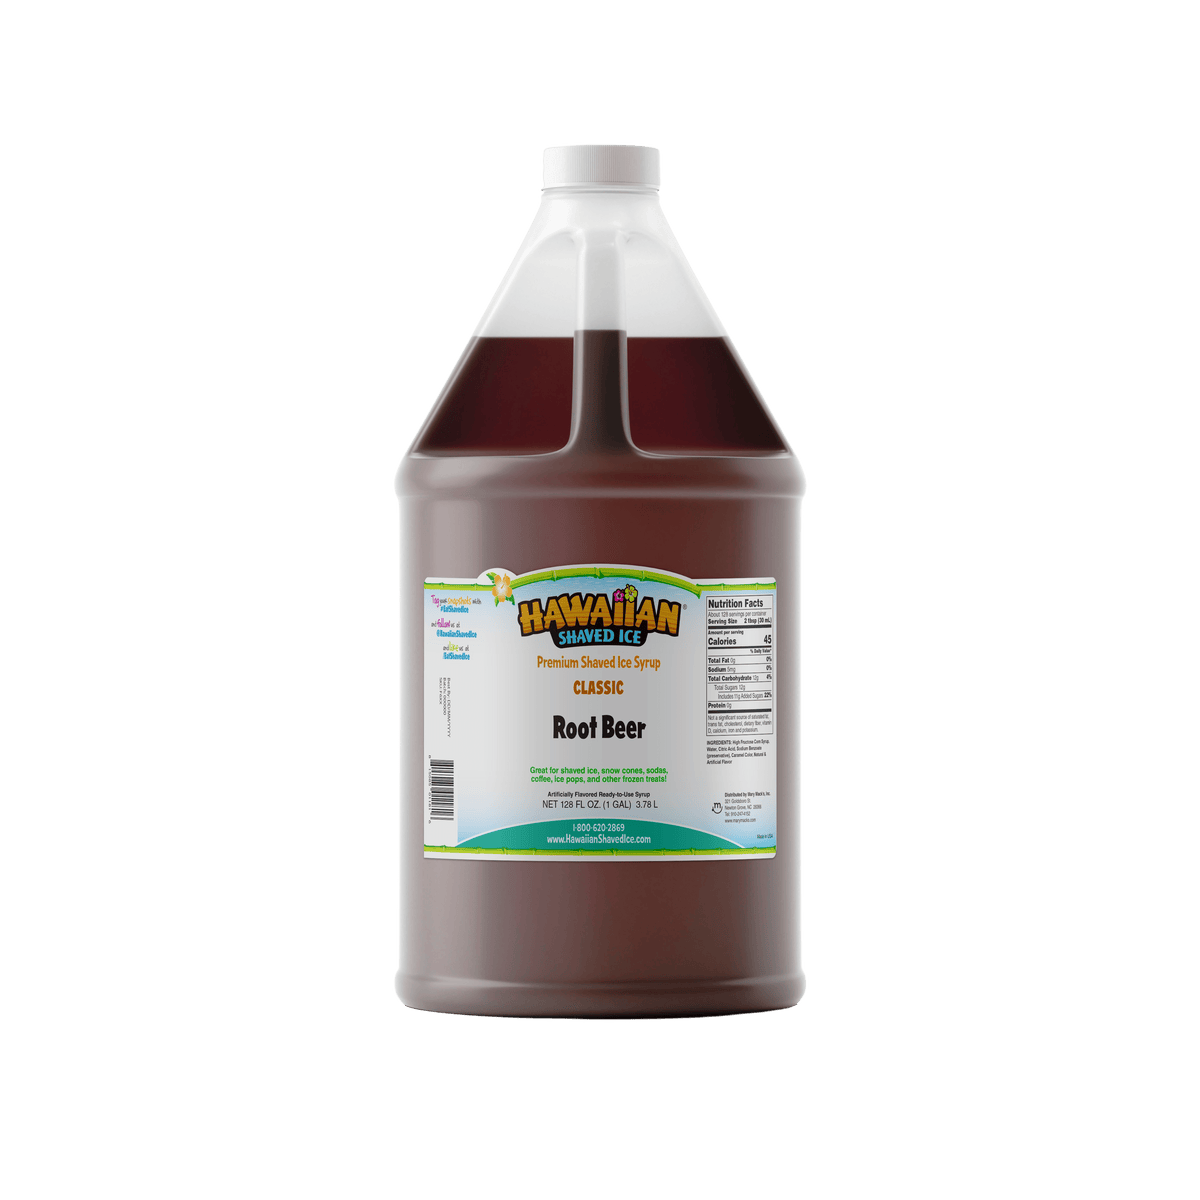 Brown, Gallon-Sized Jug of Root Beer flavored syrup